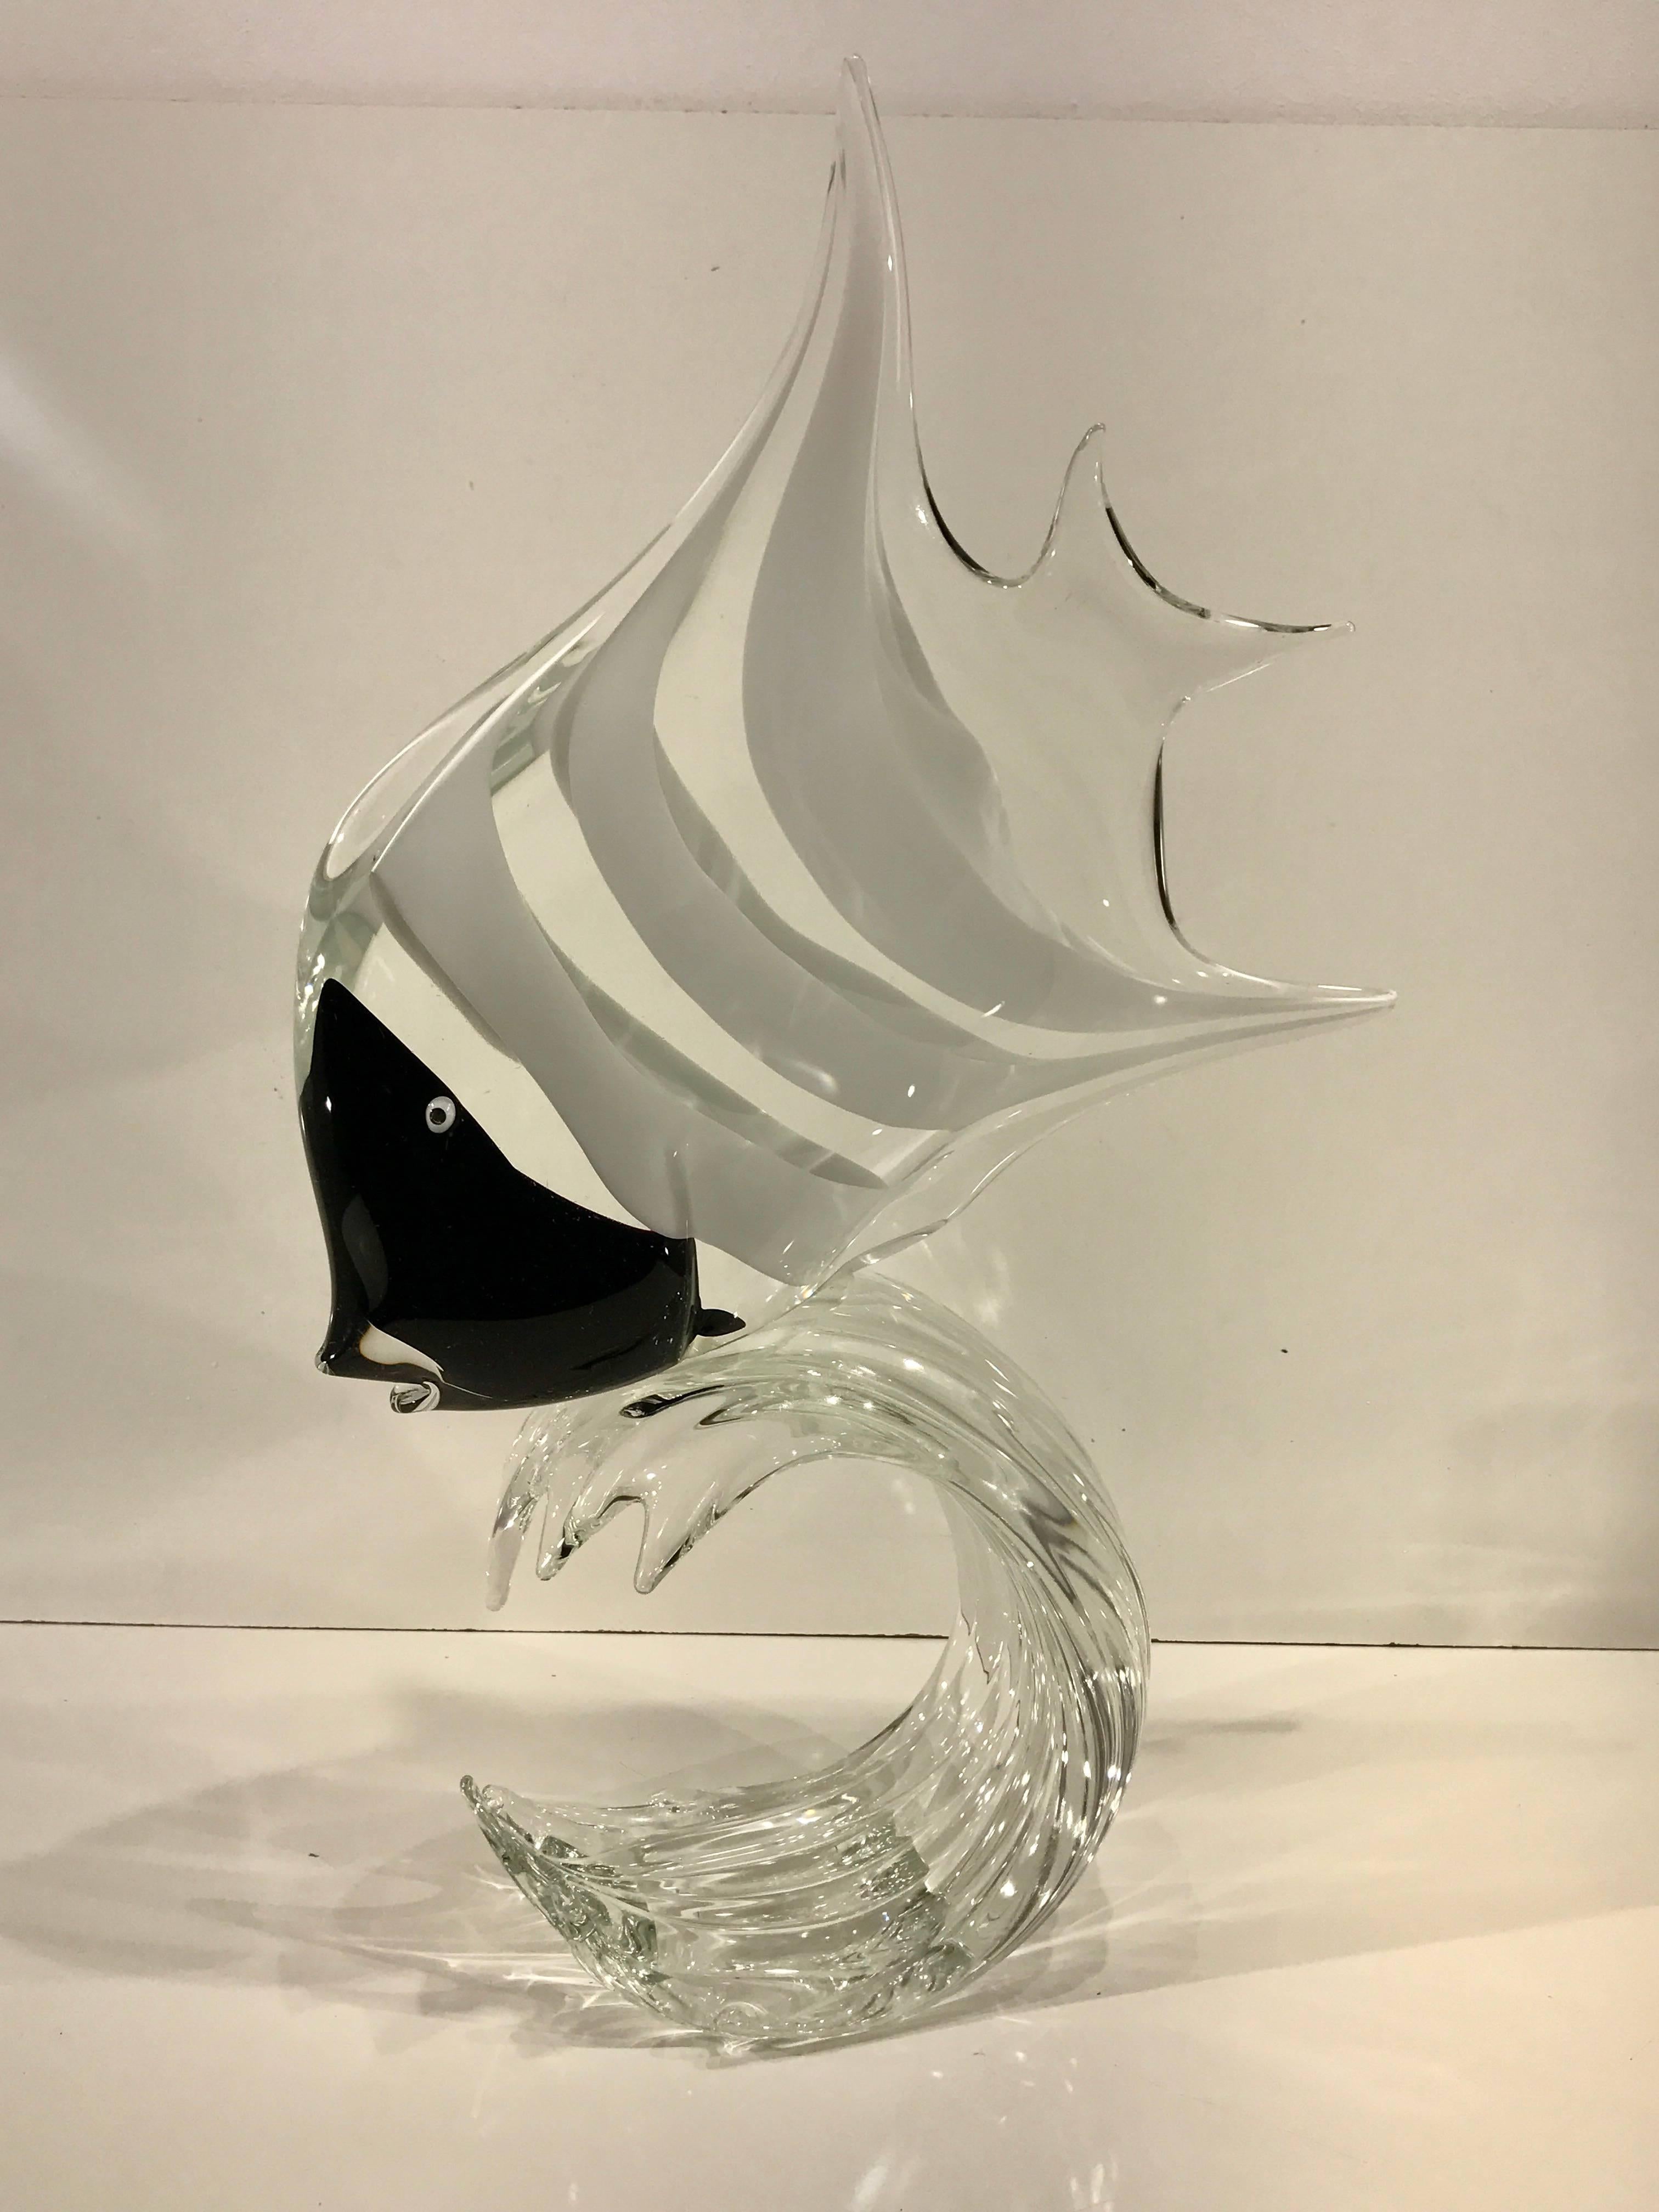 Large Murano glass Angel Fish sculpture, by Licio Zanetti, In black and white tones
This item is at our Atlanta GA, Location, not Palm Beach.


